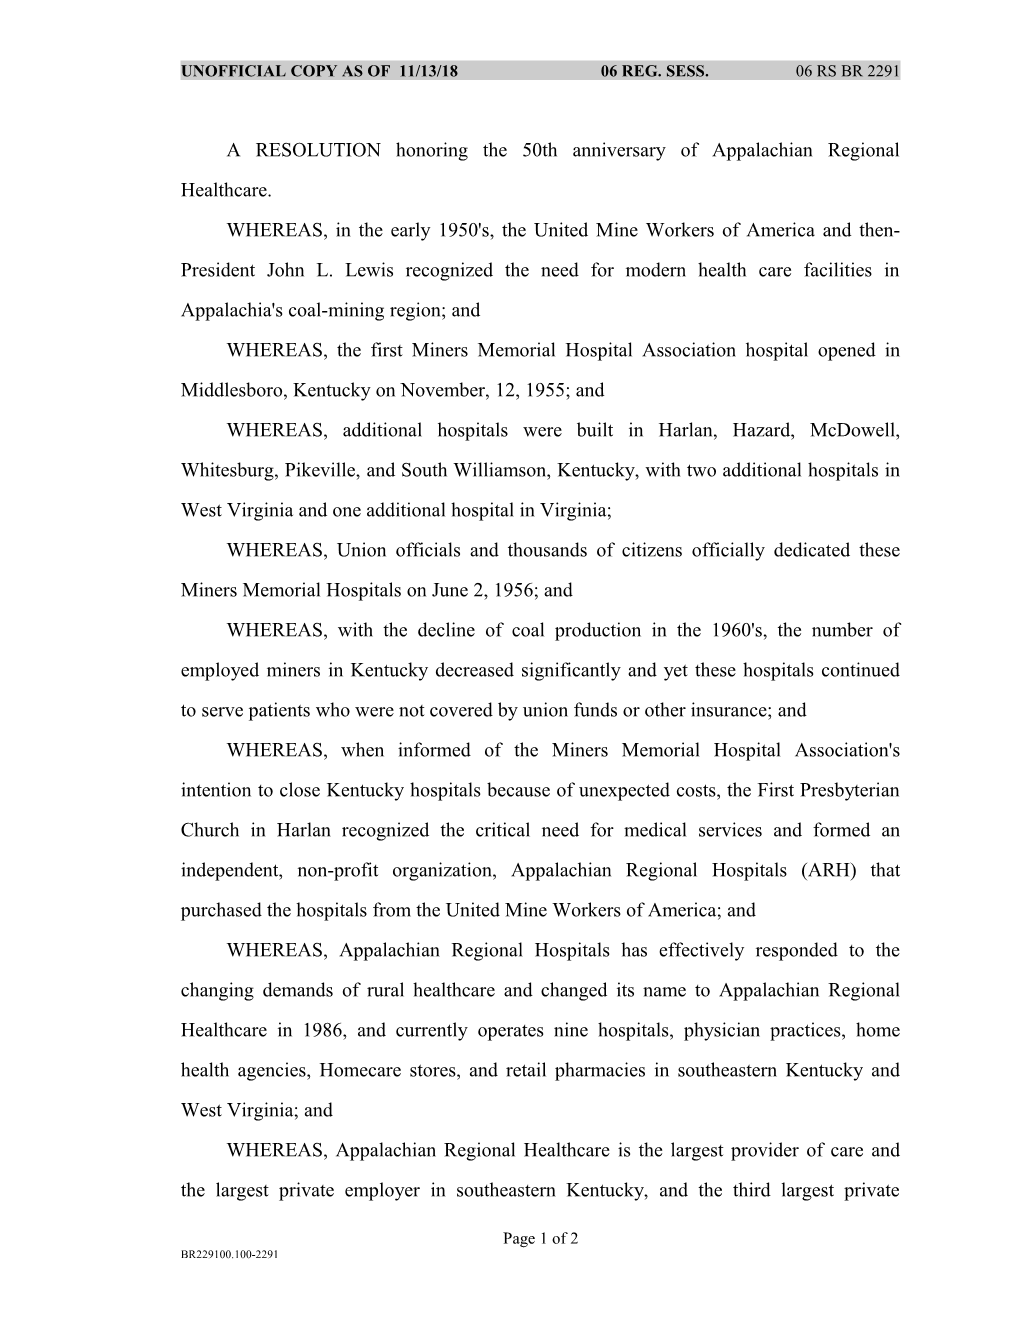 A RESOLUTION Honoring the 50Th Anniversary of Appalachian Regional Healthcare